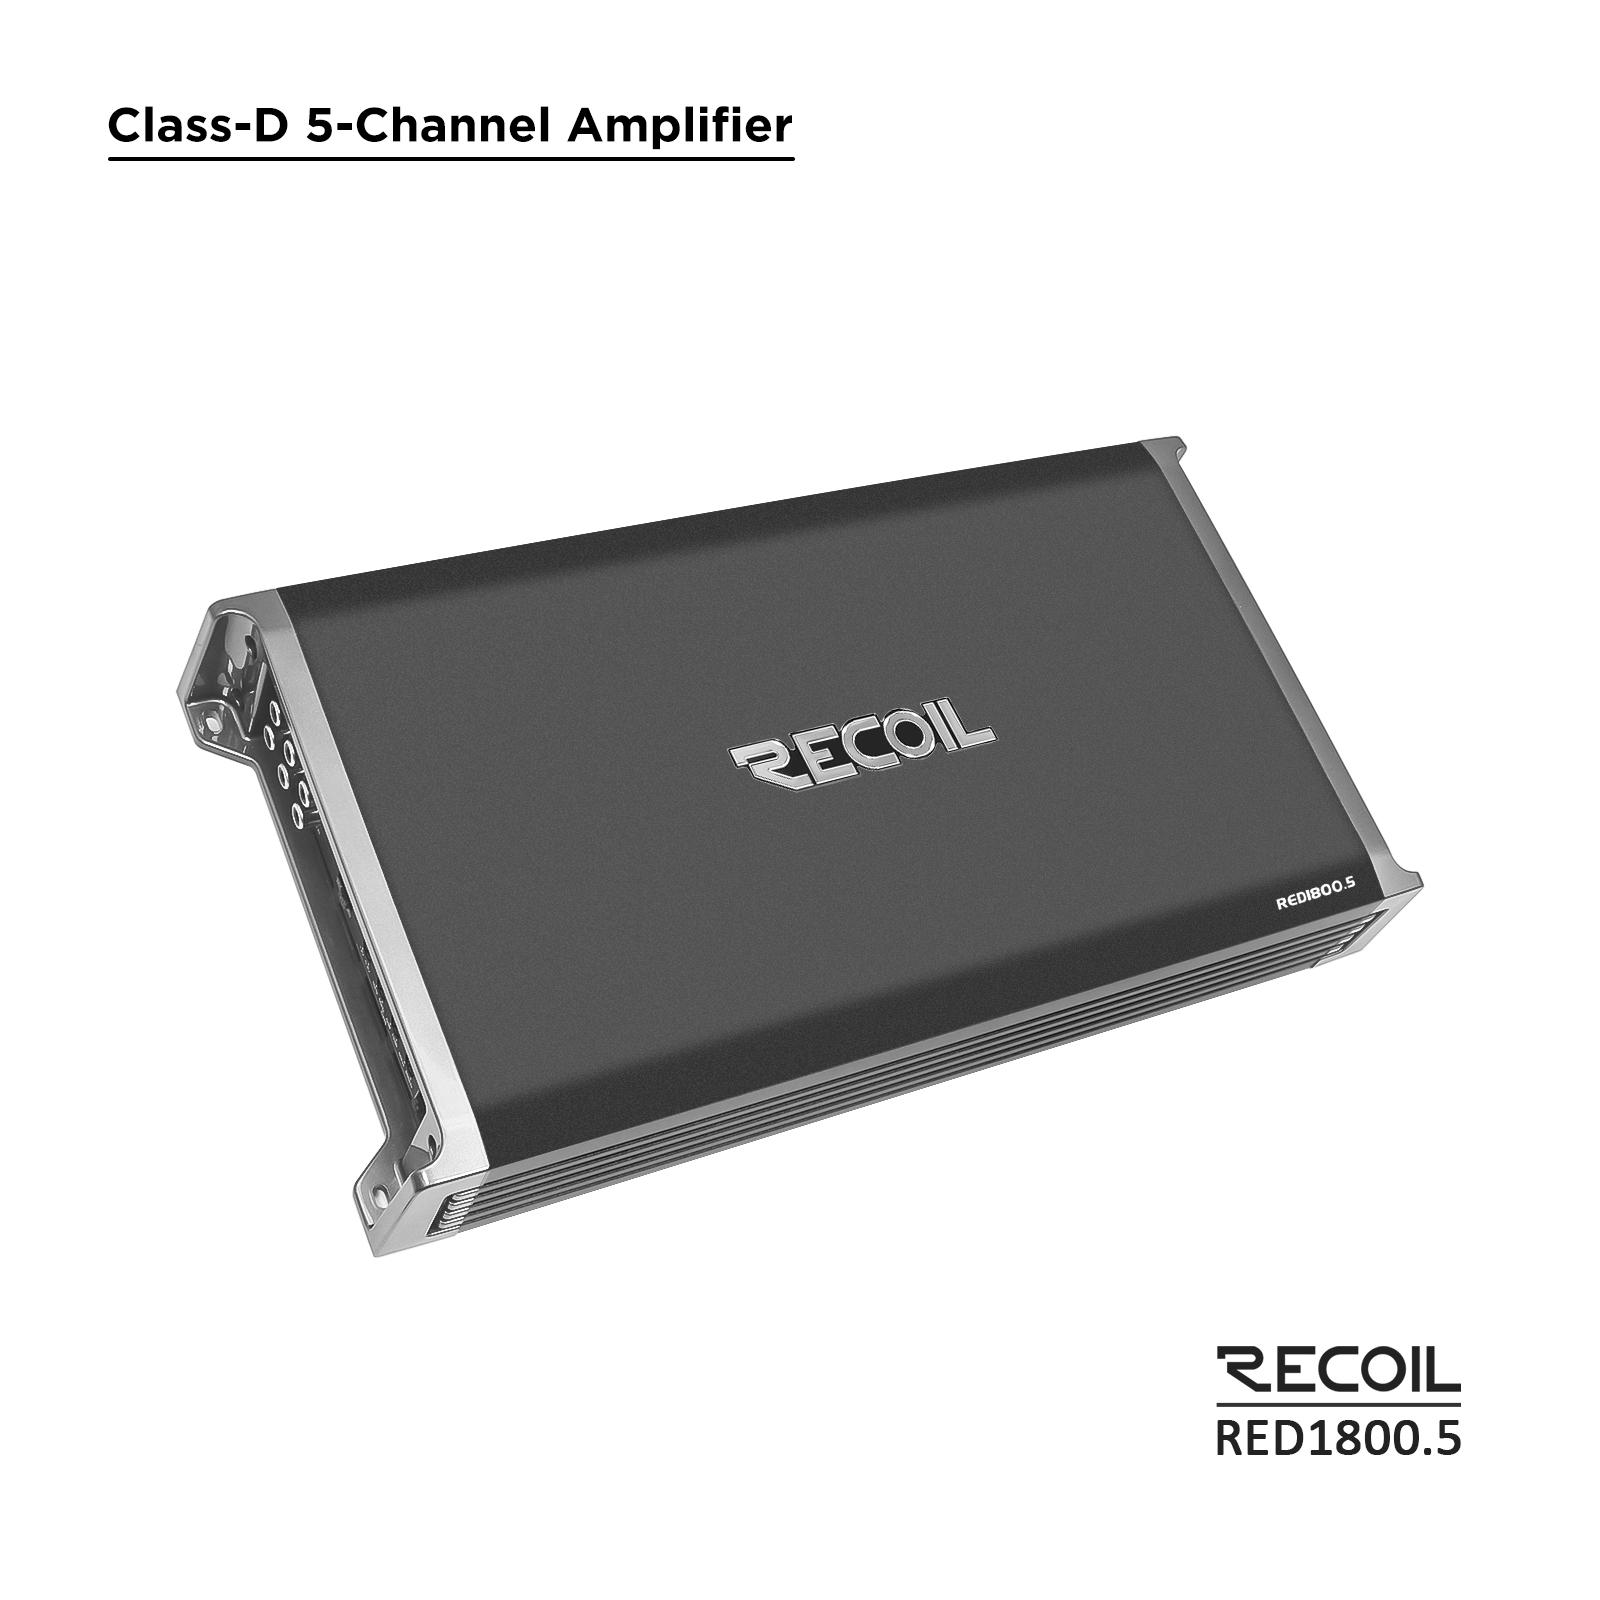 RED1800.5 1,800 Watts Class-D Car Audio 5-Channel Amplifier, Mono 1 Ohm  Stable, Remote Bass Knob Included